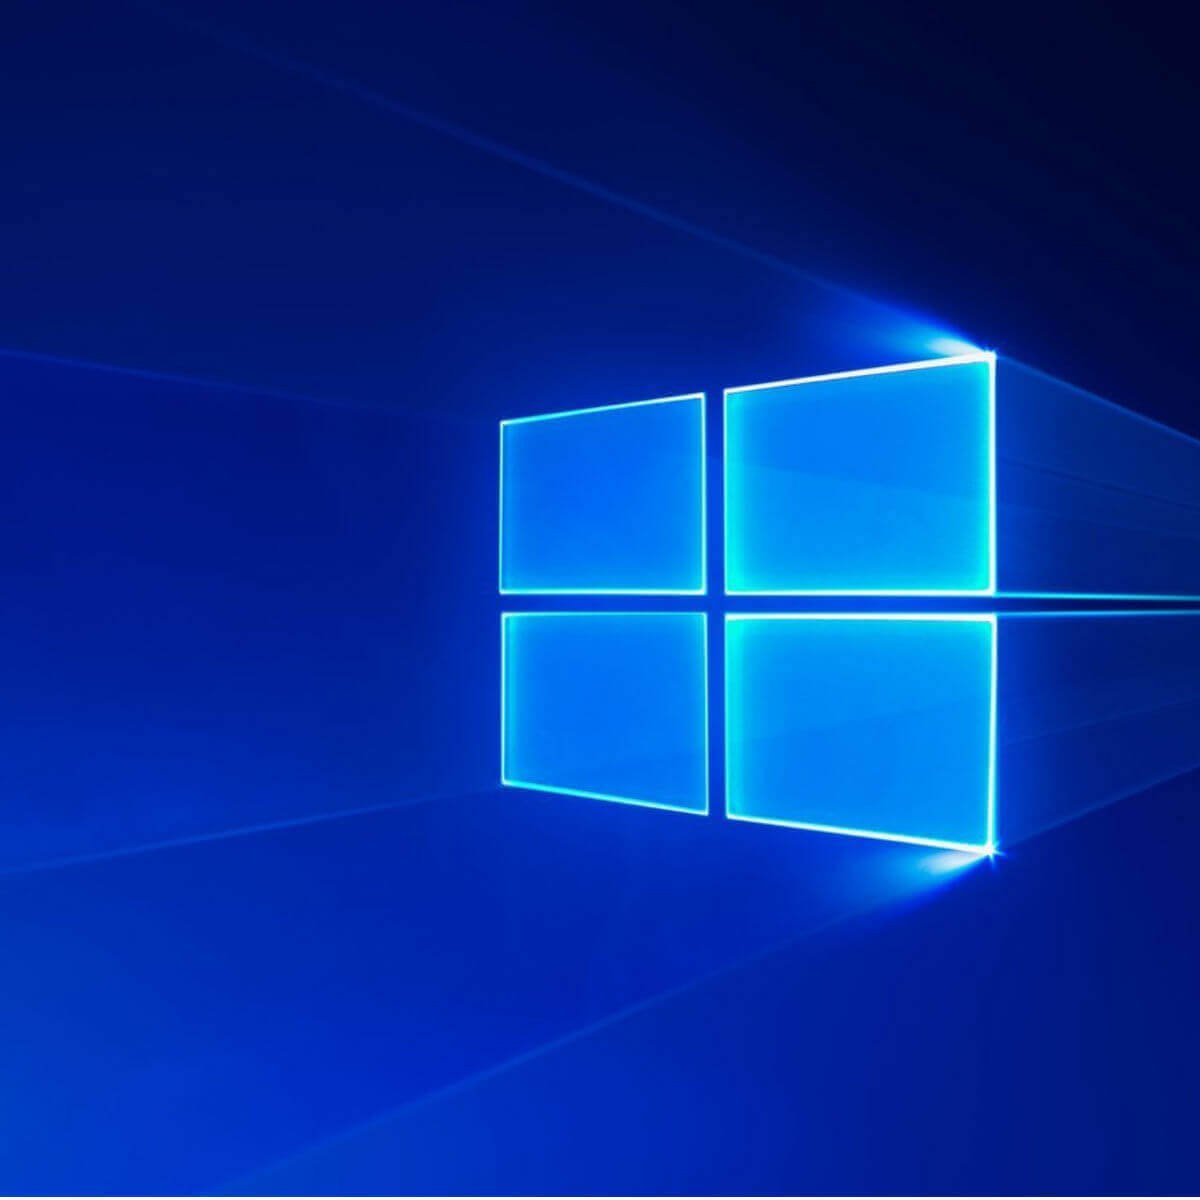 Windows Virtual Desktop might arrive by the end of the year